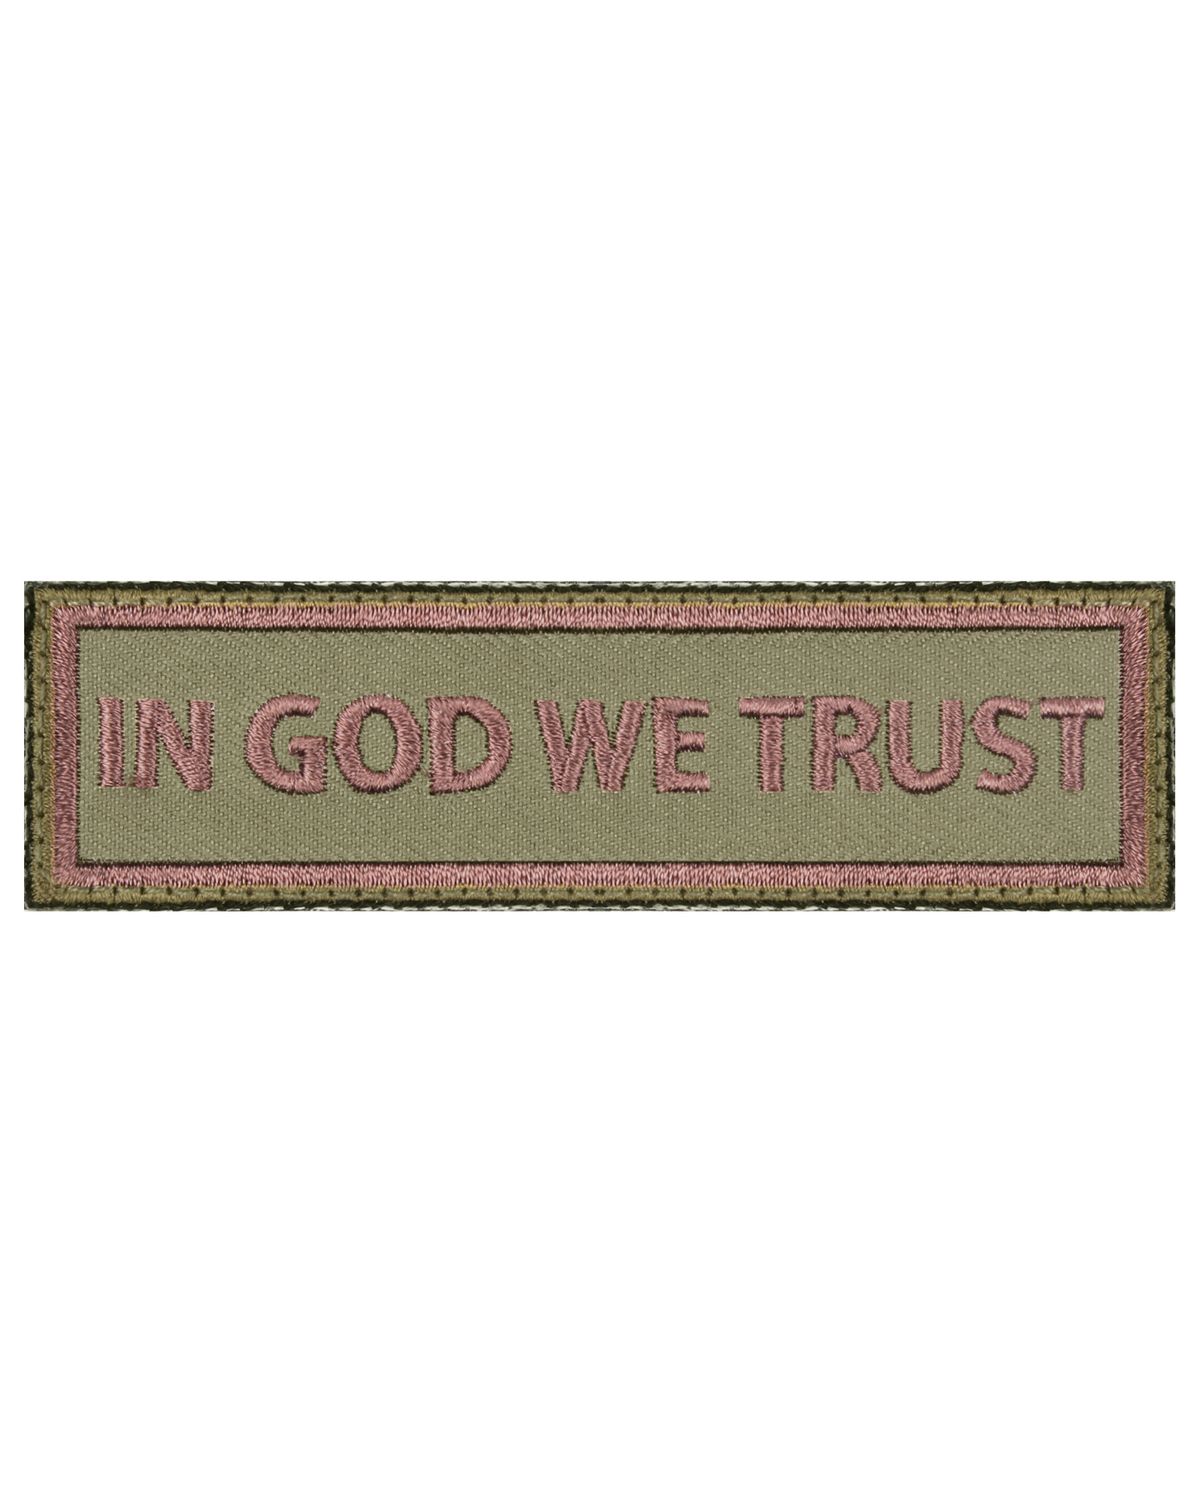 'Rothco 1890 In God We Trust Morale Patch'